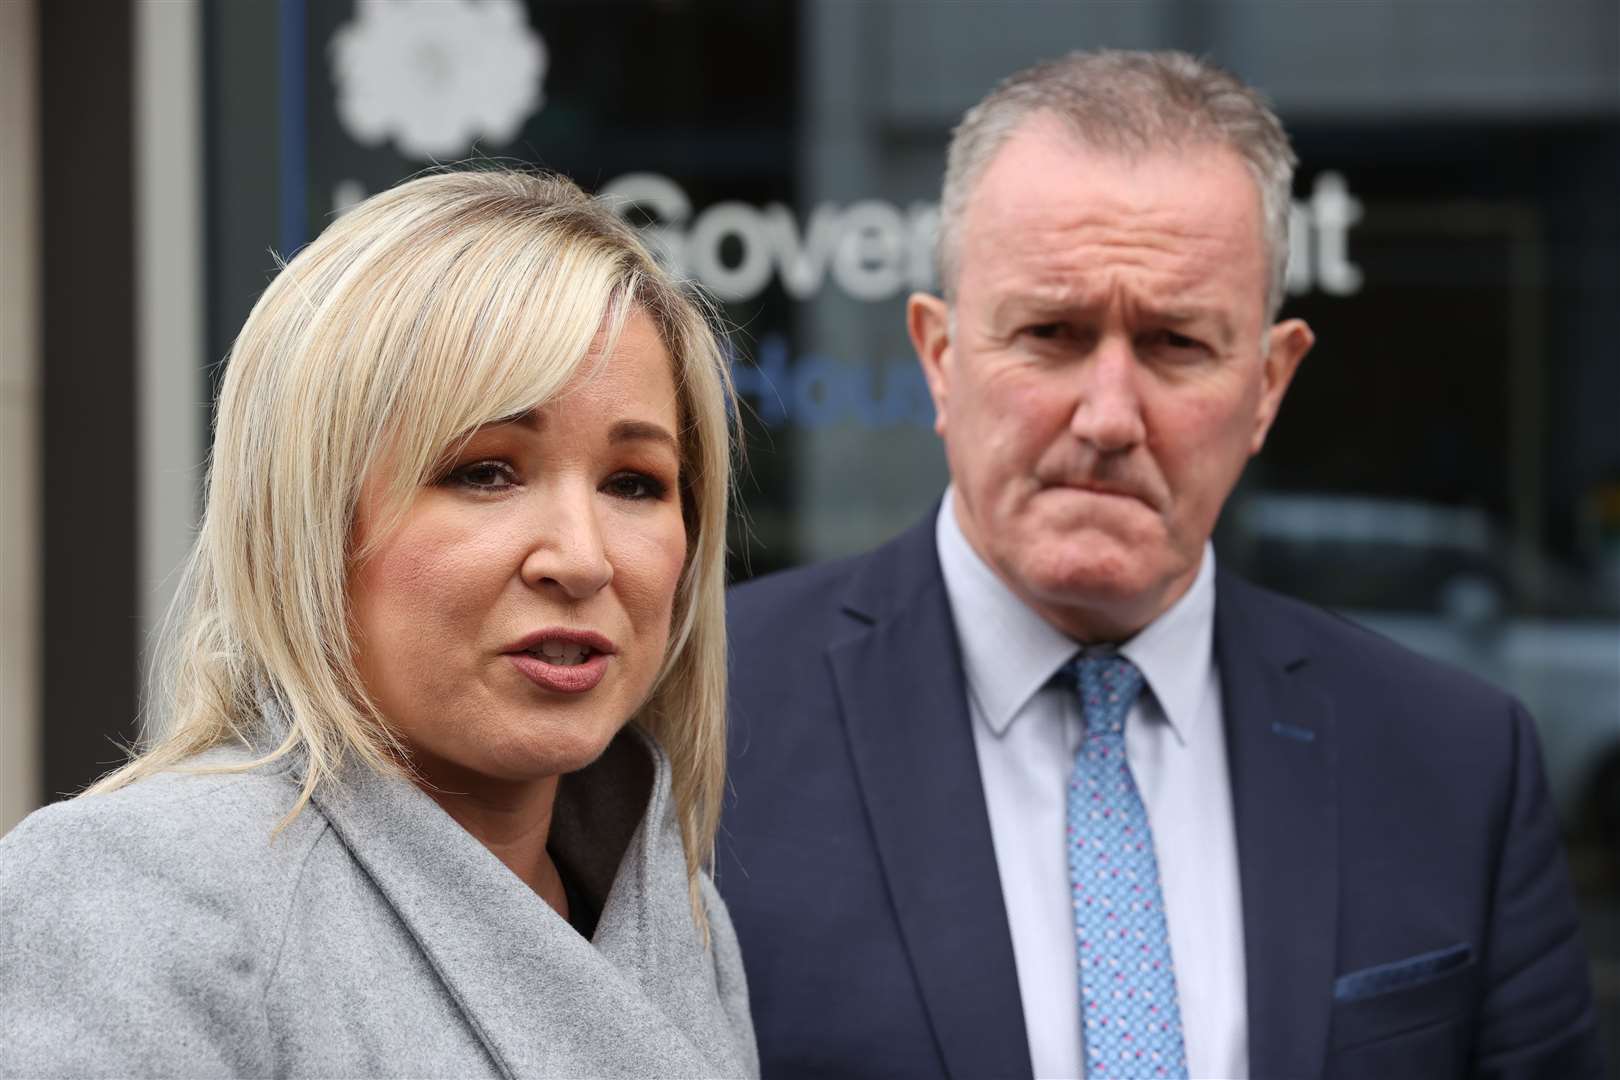 Sinn Fein vice president Michelle O’Neill and party colleague Conor Murphy speaking to the media after meeting Northern Ireland Secretary Chris Heaton-Harris (Liam McBurney/PA)